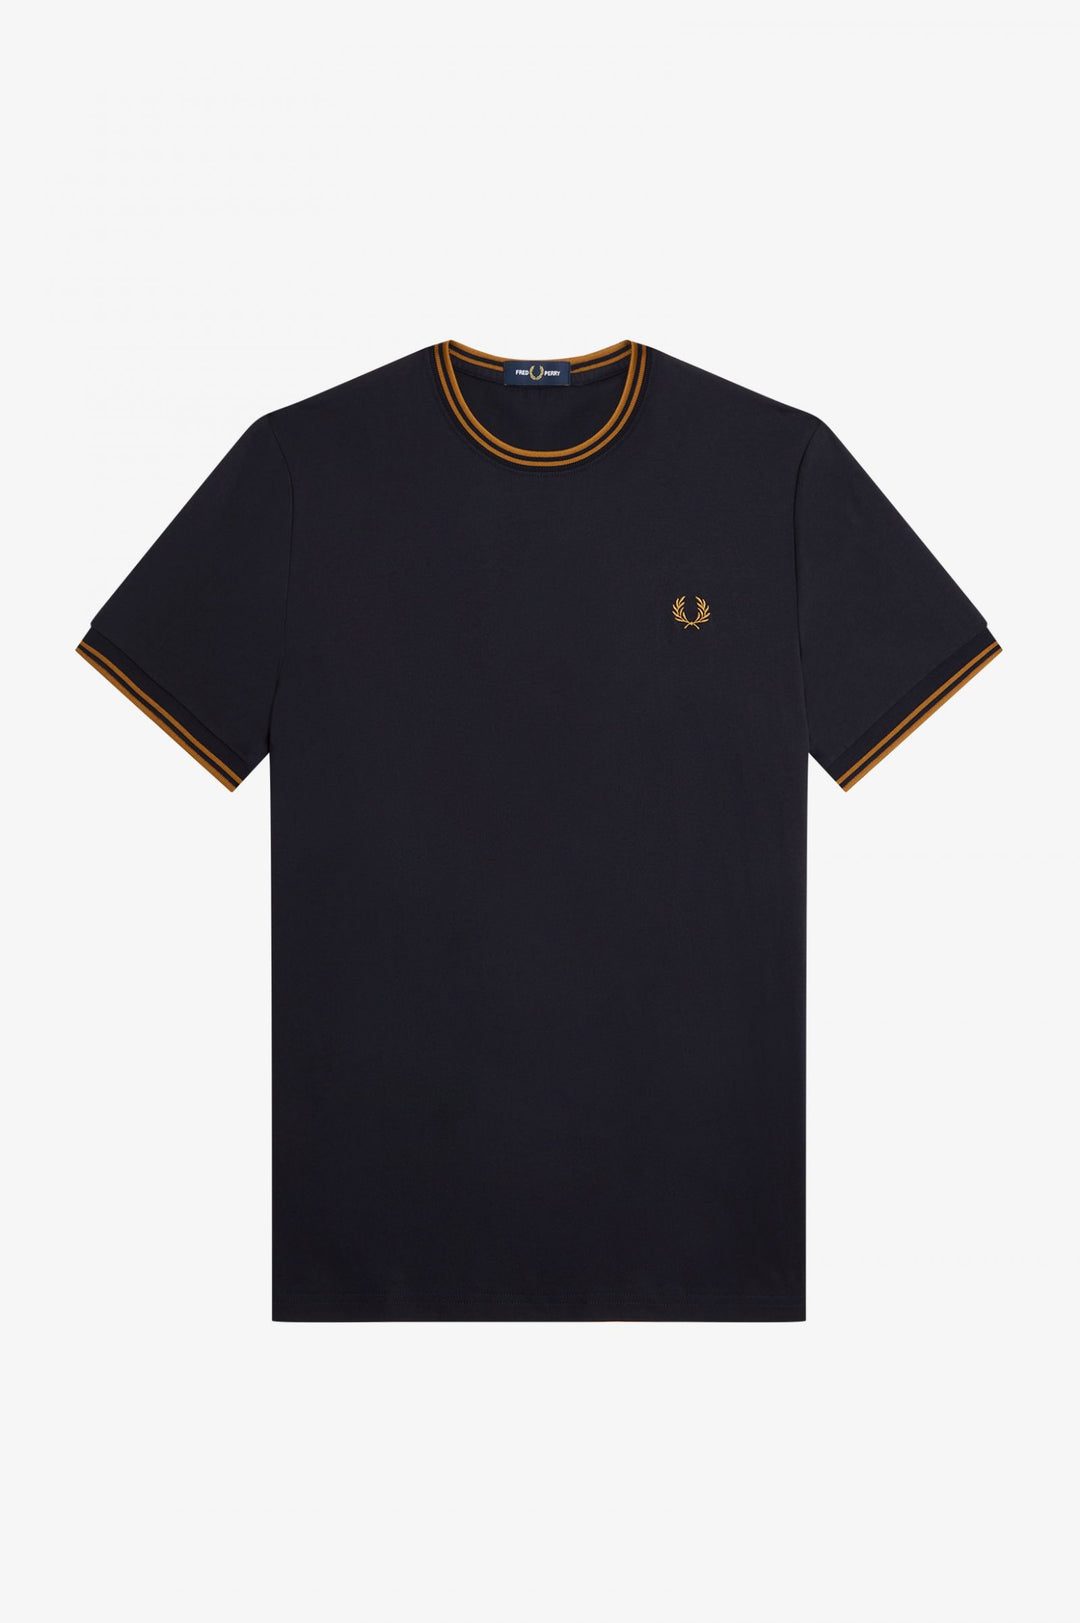 Fred Perry Twin Tipped T-Shirt - Navy/Dark Caramel